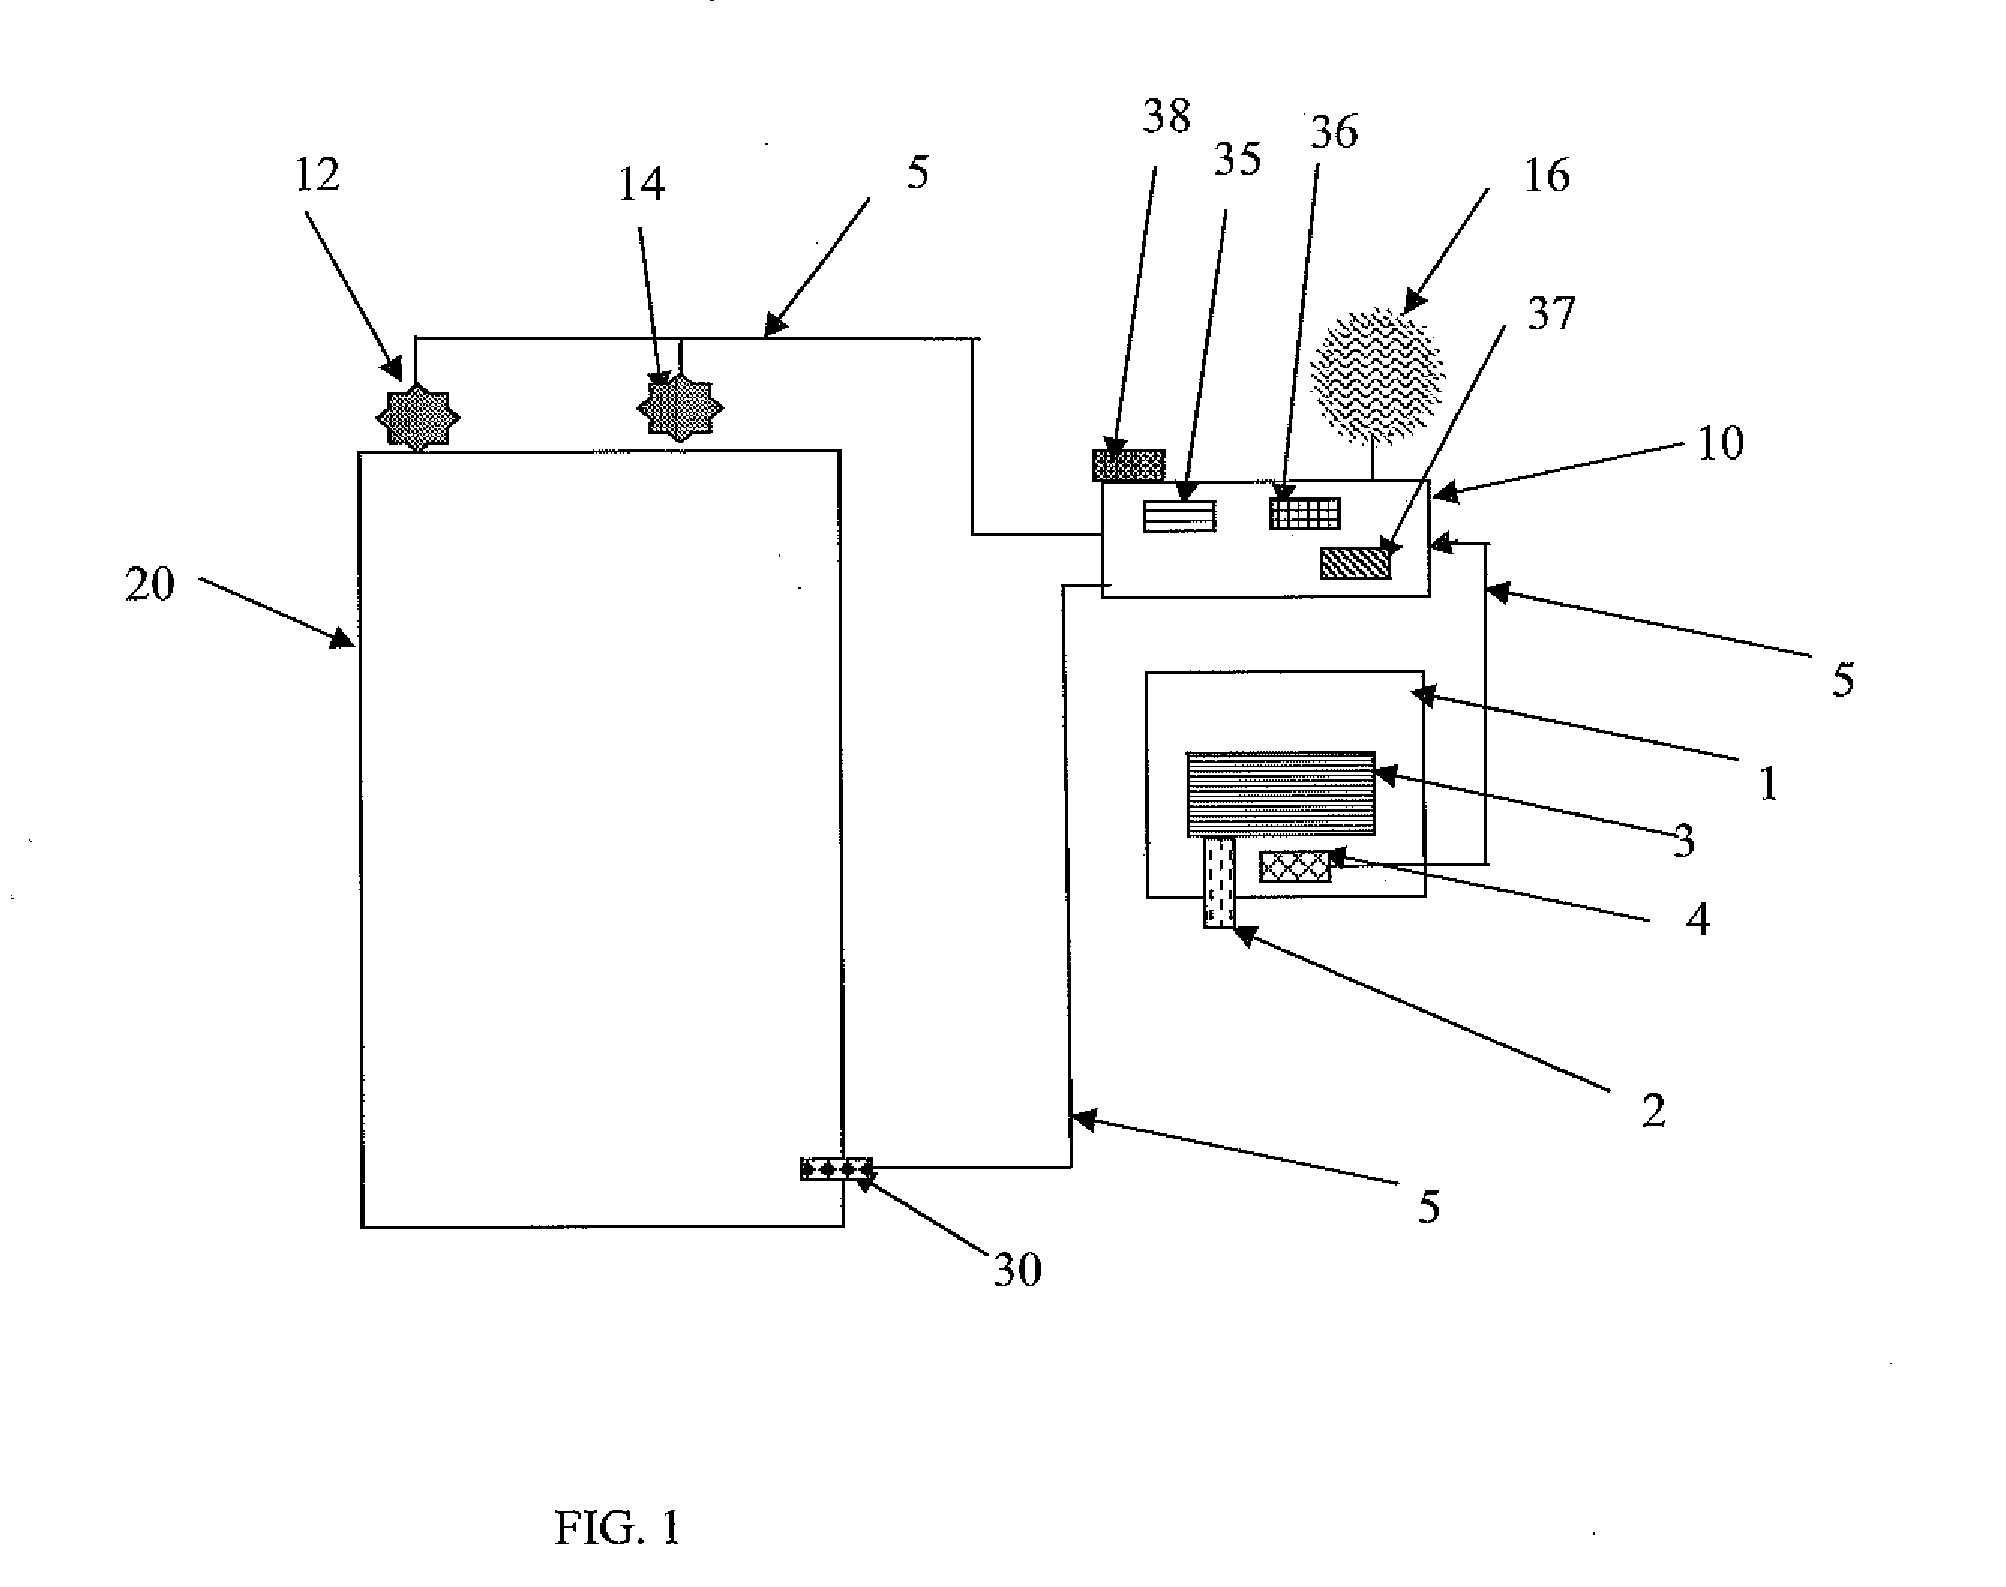 Apparatus and Method for Monitoring Hygiene